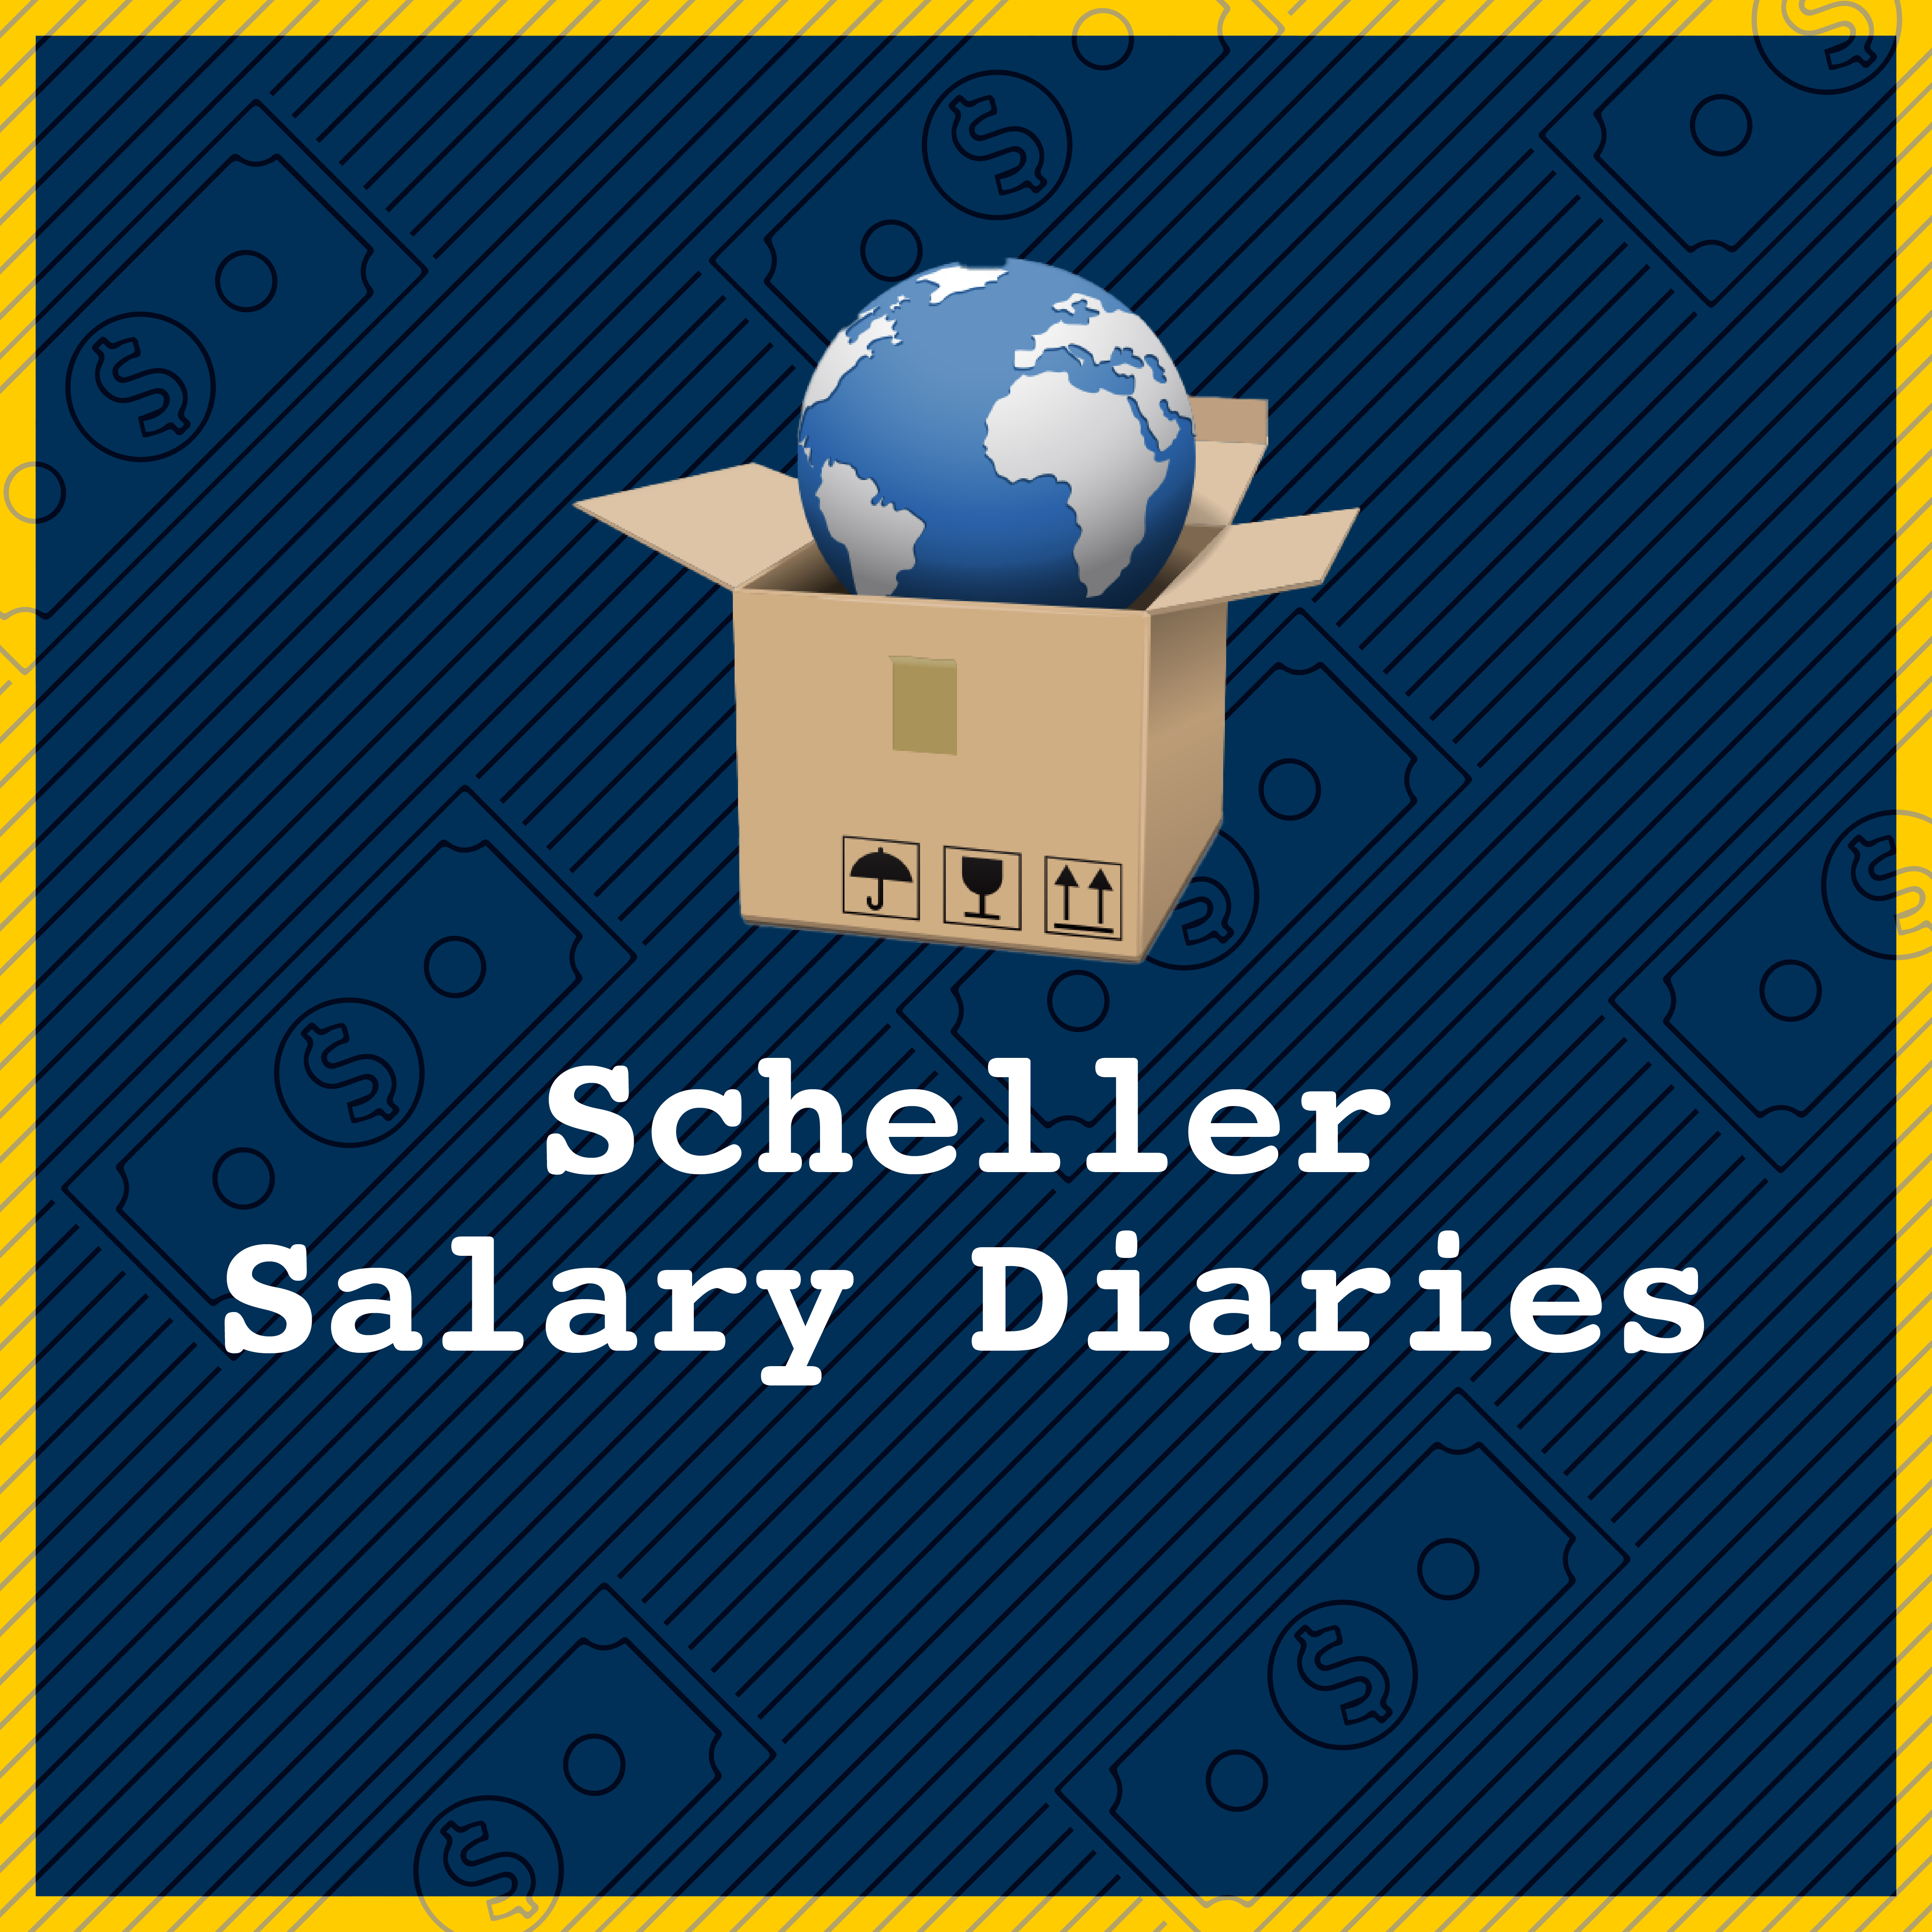 Scheller Salary Diaries with a globe and shipping box representing global delivery